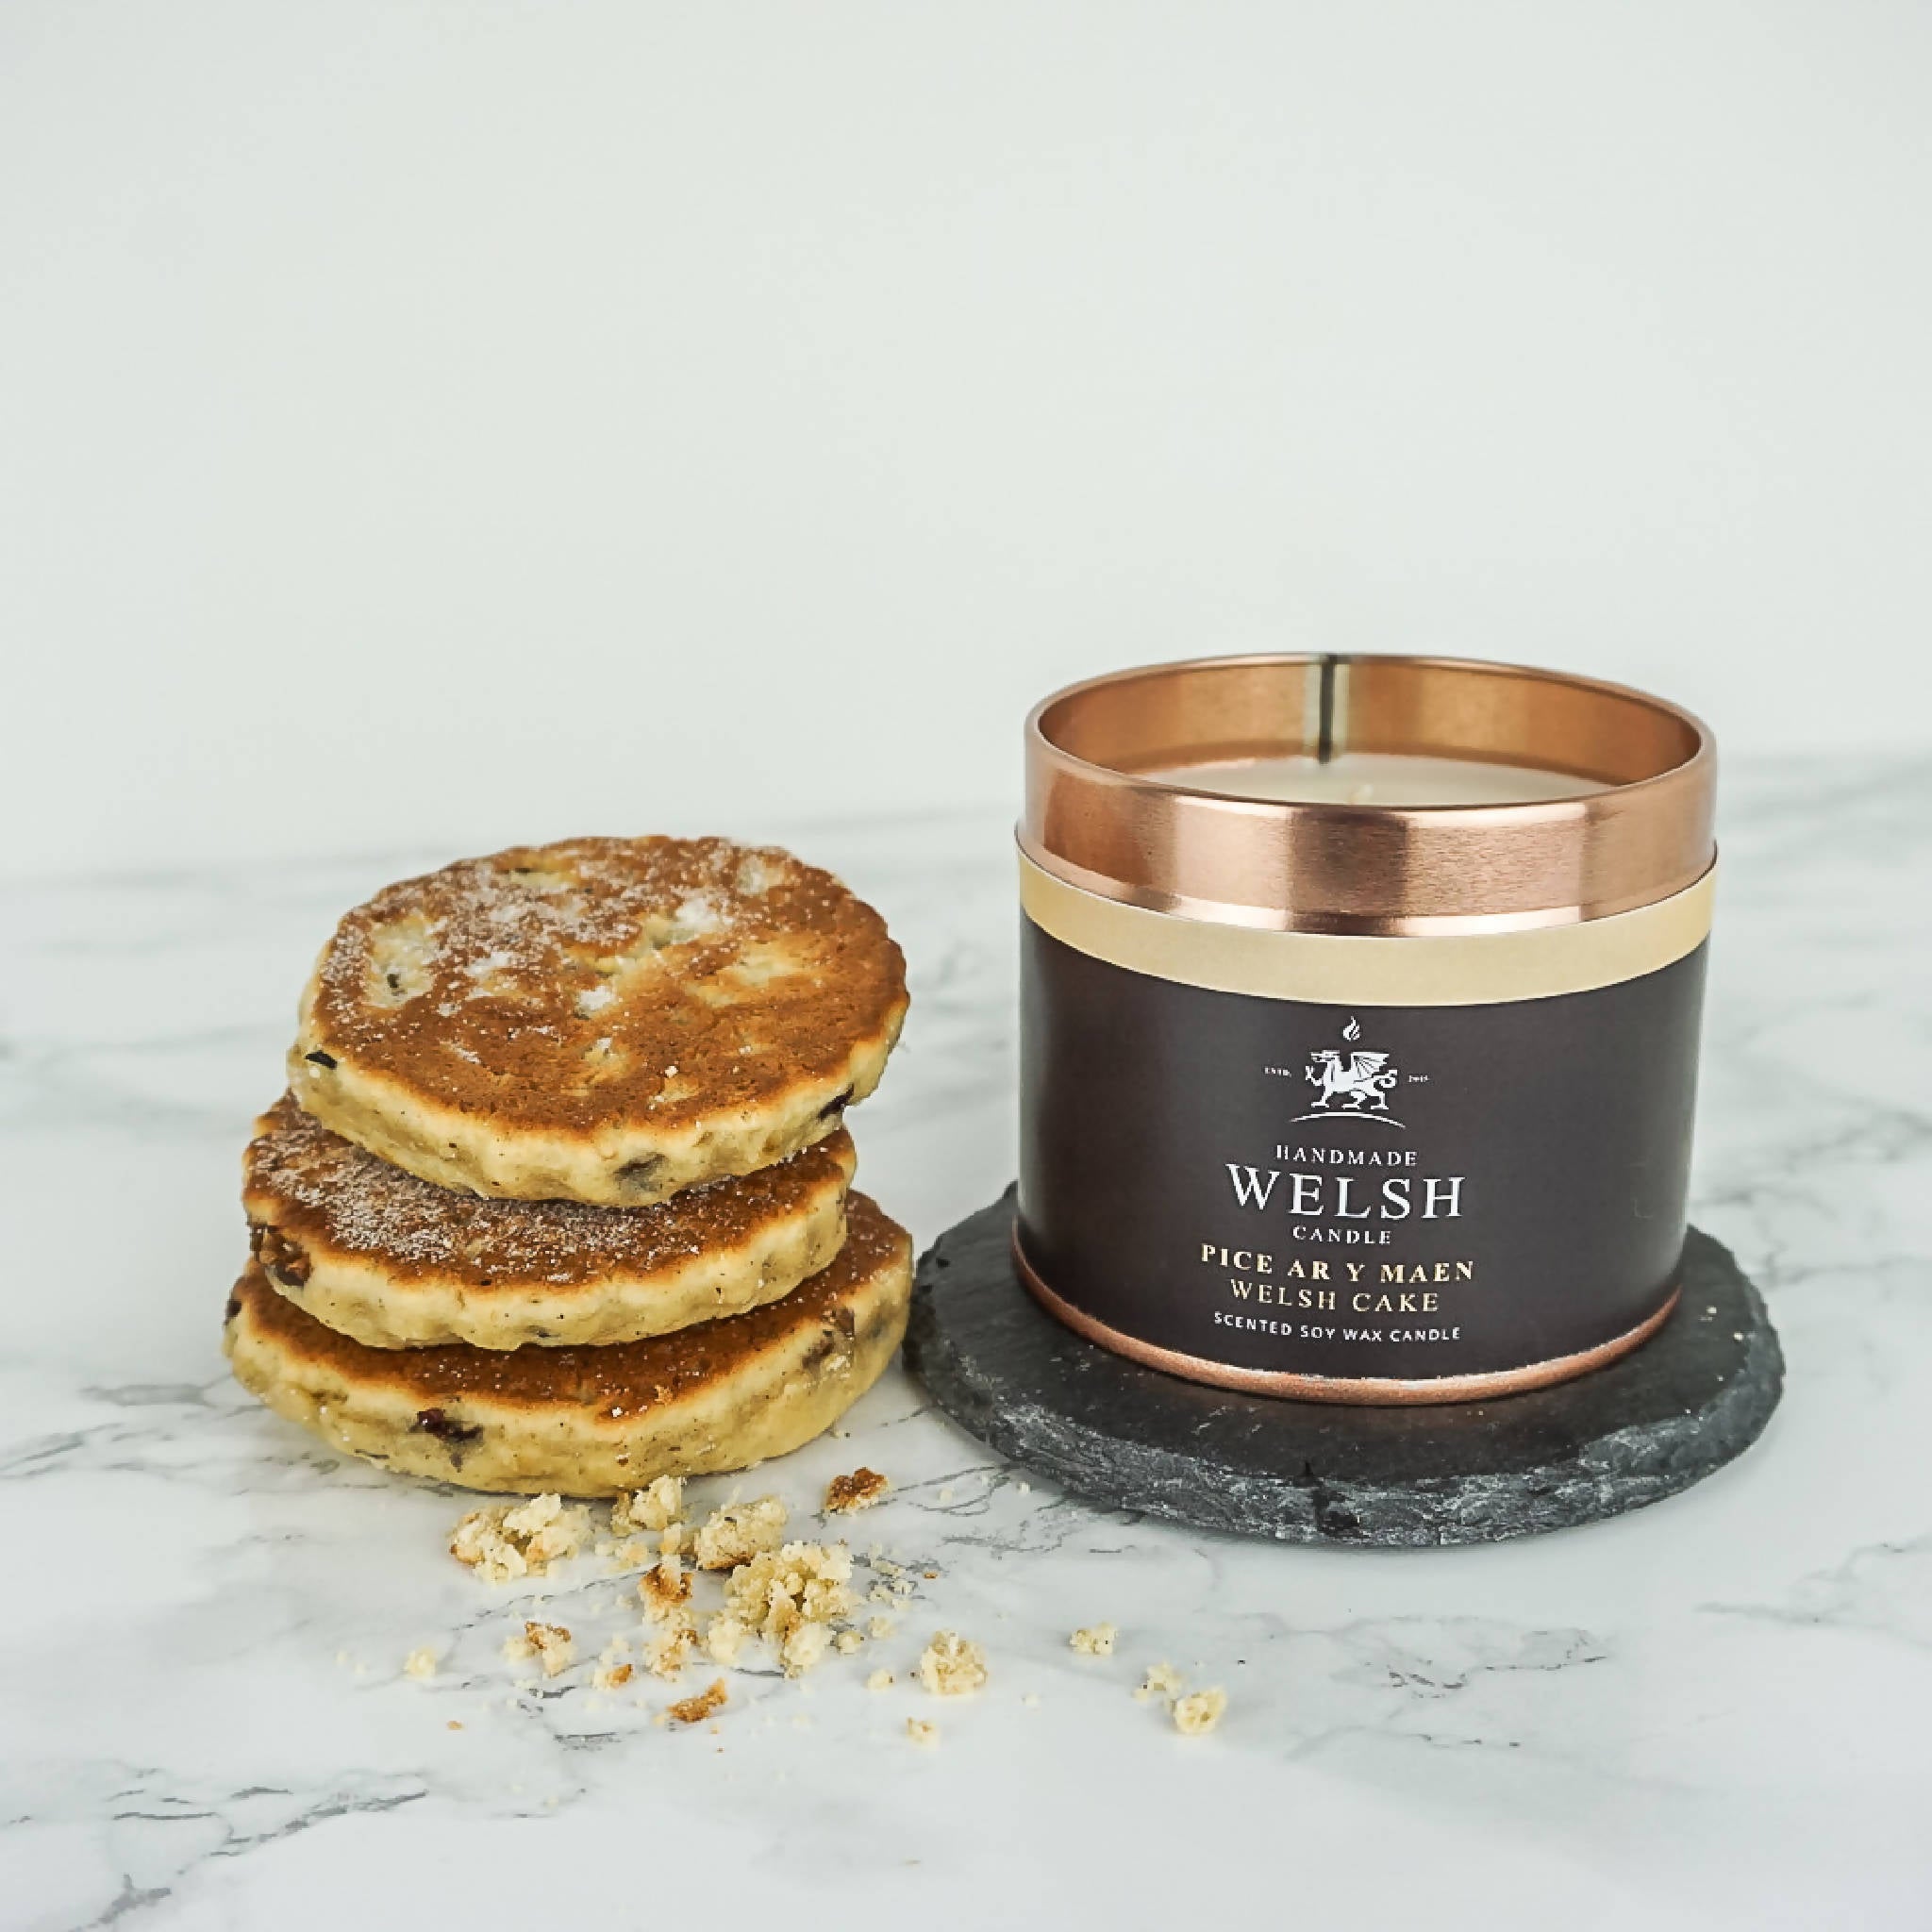 Welsh Cake Tin Candle | Handmade Welsh Candle